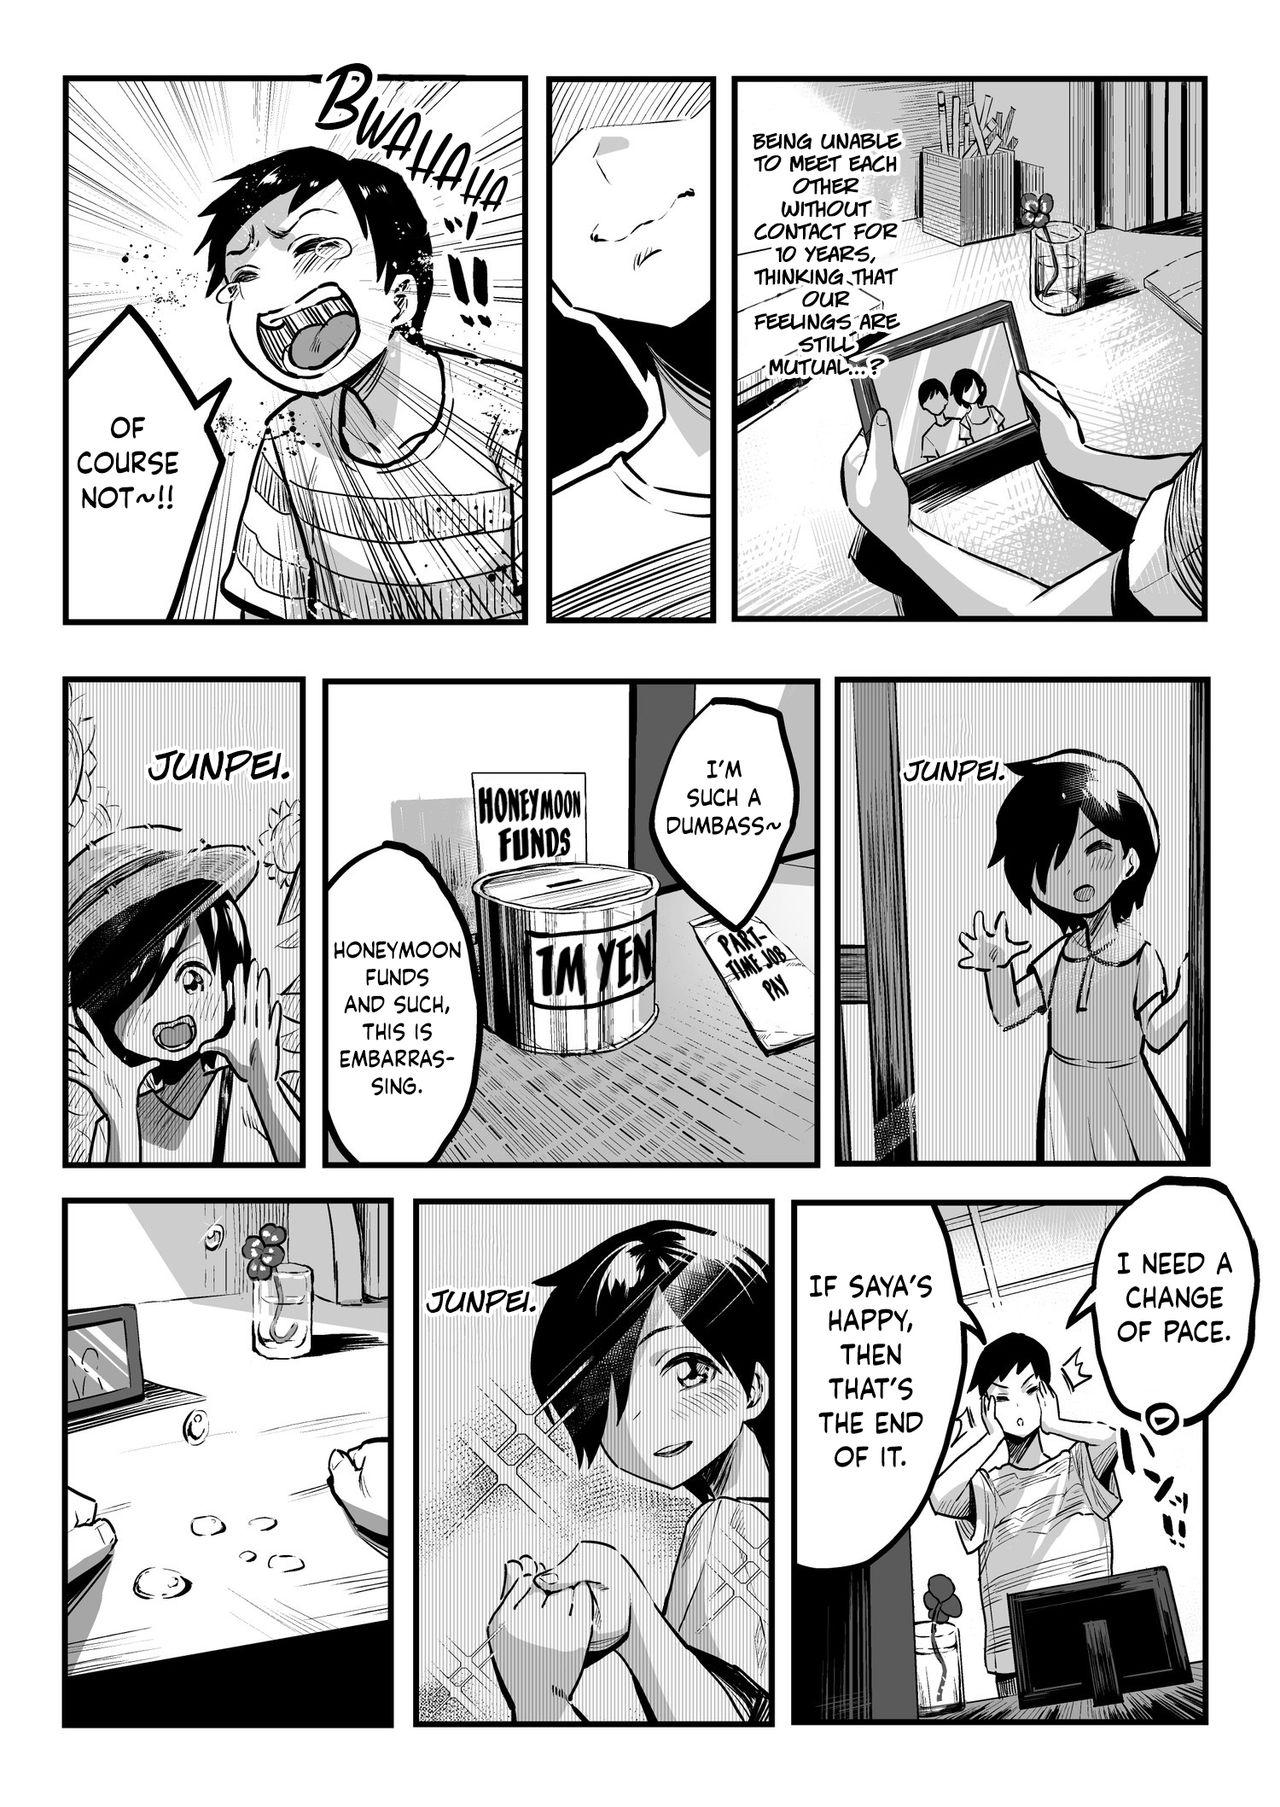 Public Nudity Juunengo no Hachigatsu Kimi to. | August, 10 Years Later, With You. - Original Gay Friend - Page 10